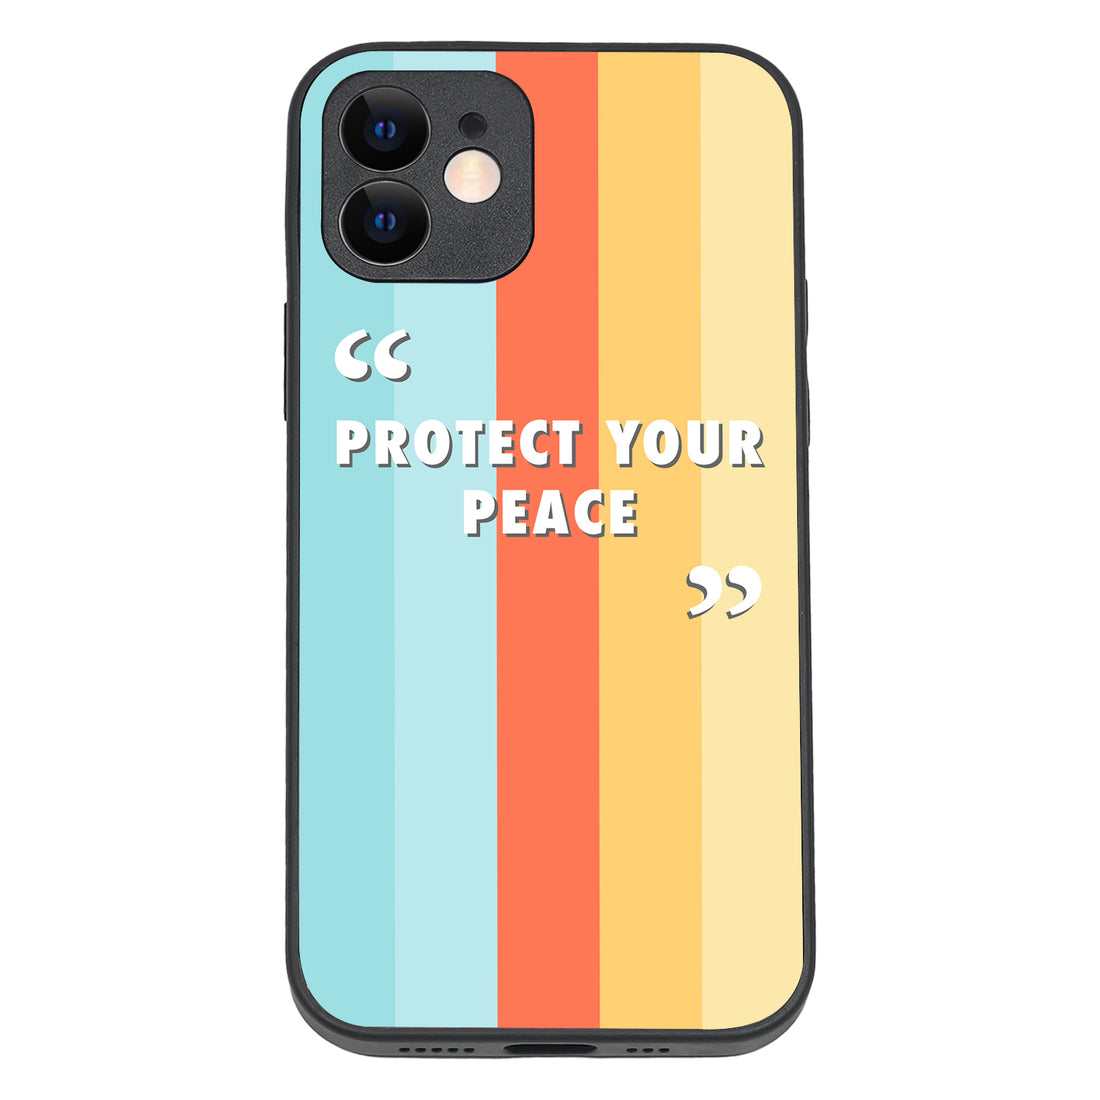 Protect your peace Motivational Quotes iPhone 12 Case